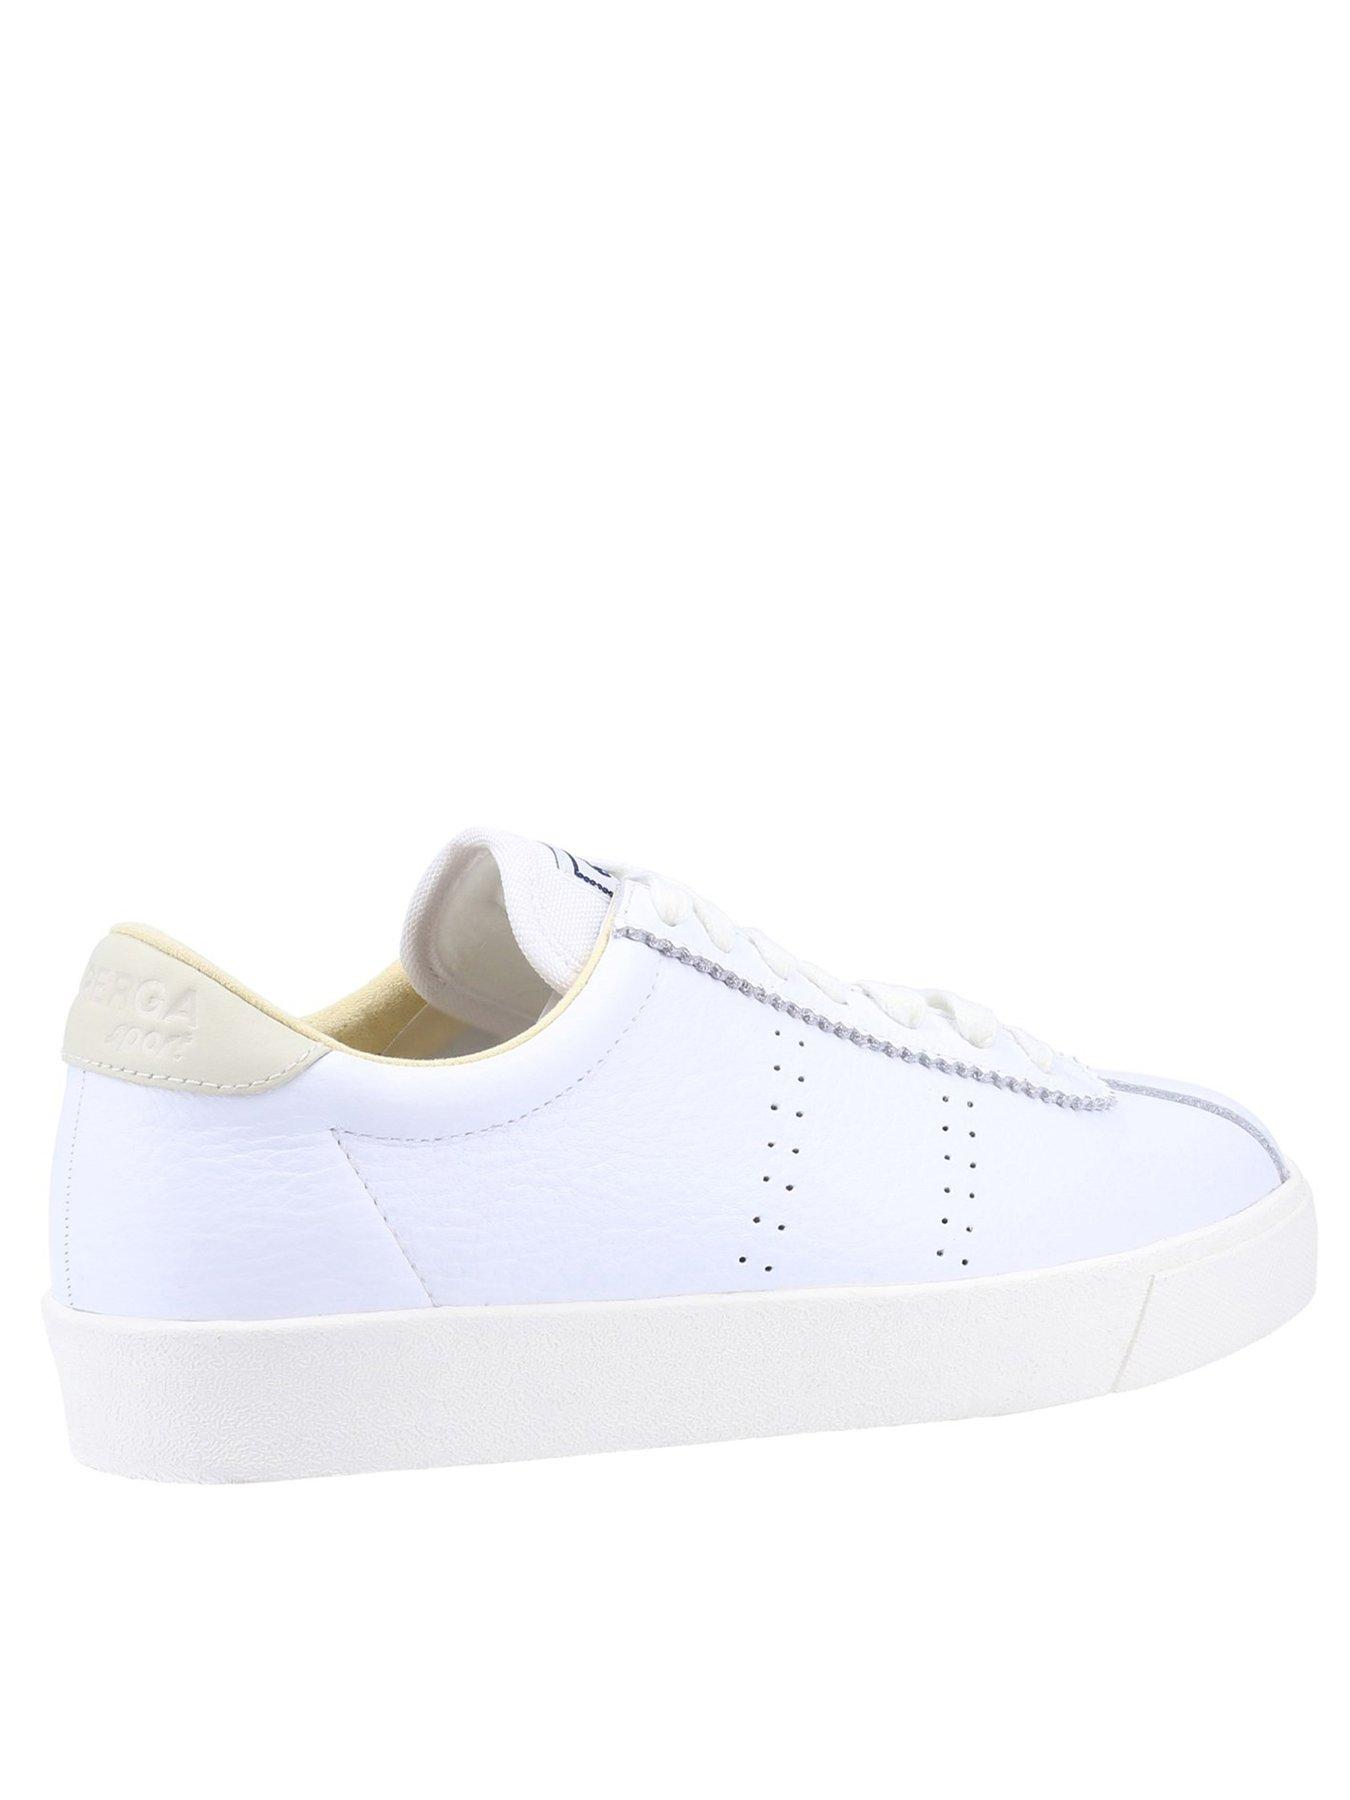 SUPERGA 2843 Club S Comfort Leather Trainers - White | very.co.uk